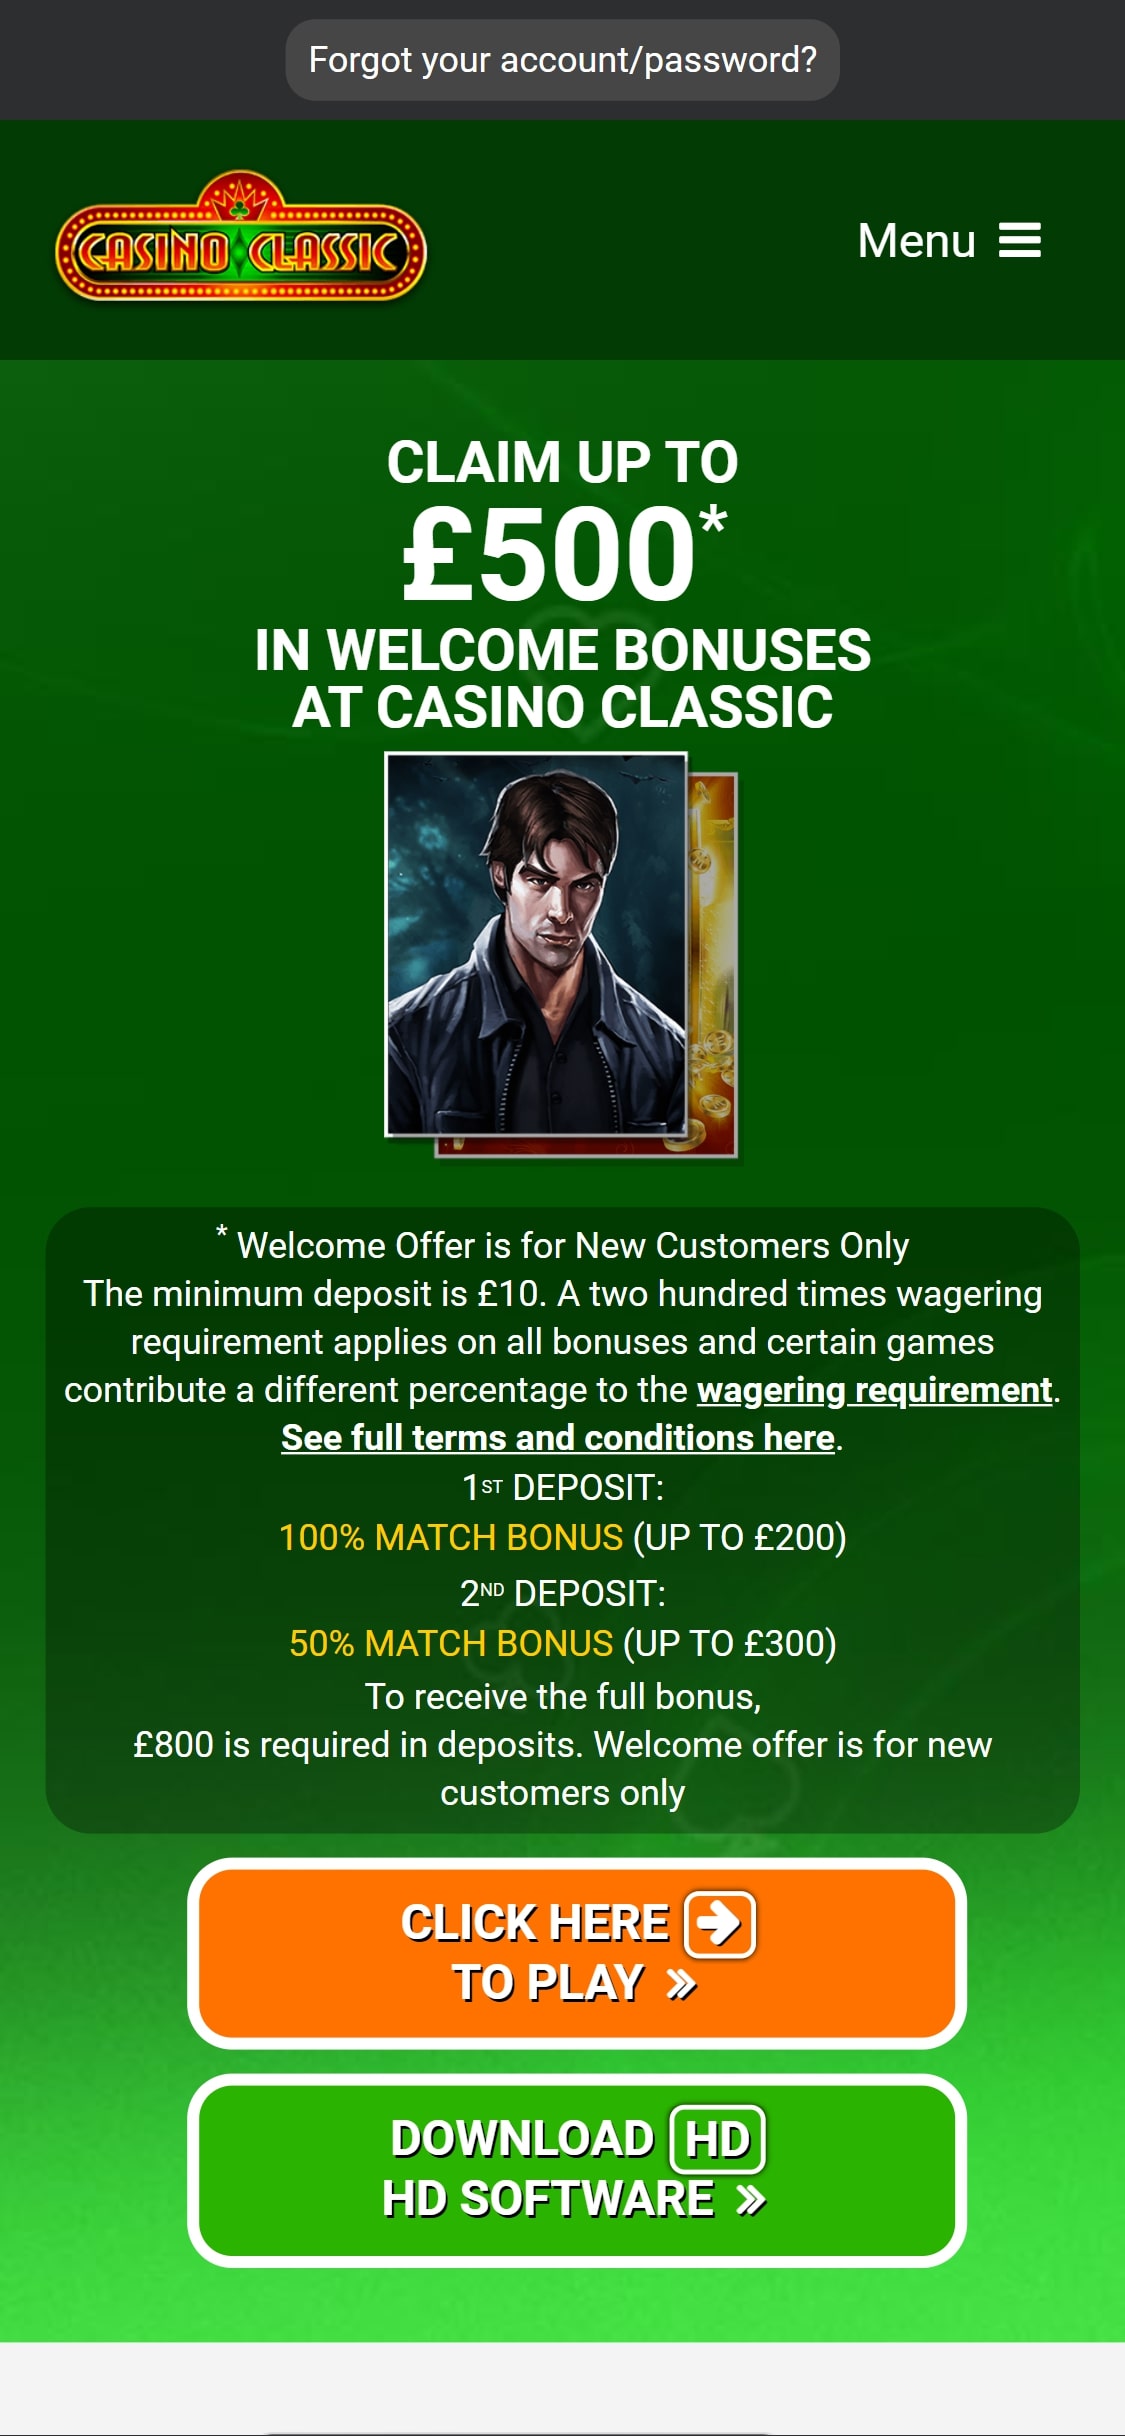 Casino Classic UK Mobile Review